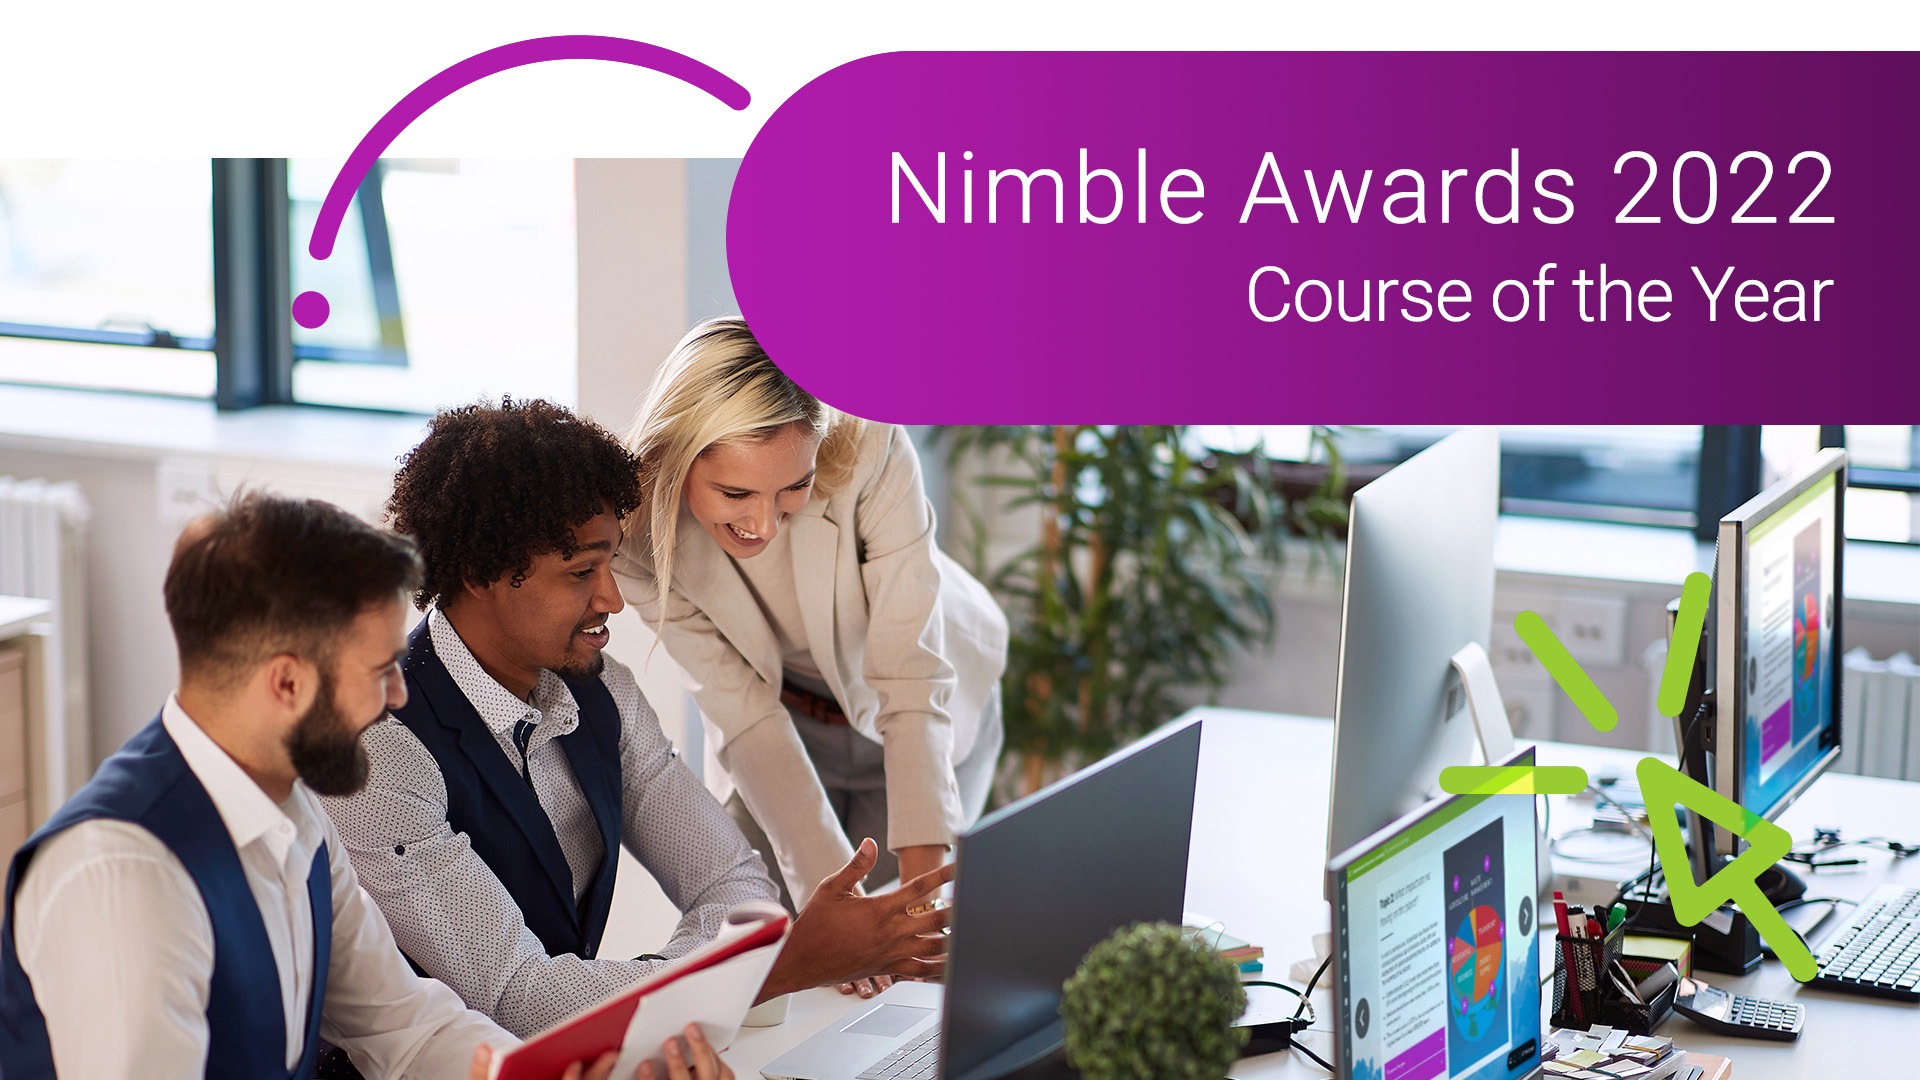 Nimble Awards Course of the Year 2022